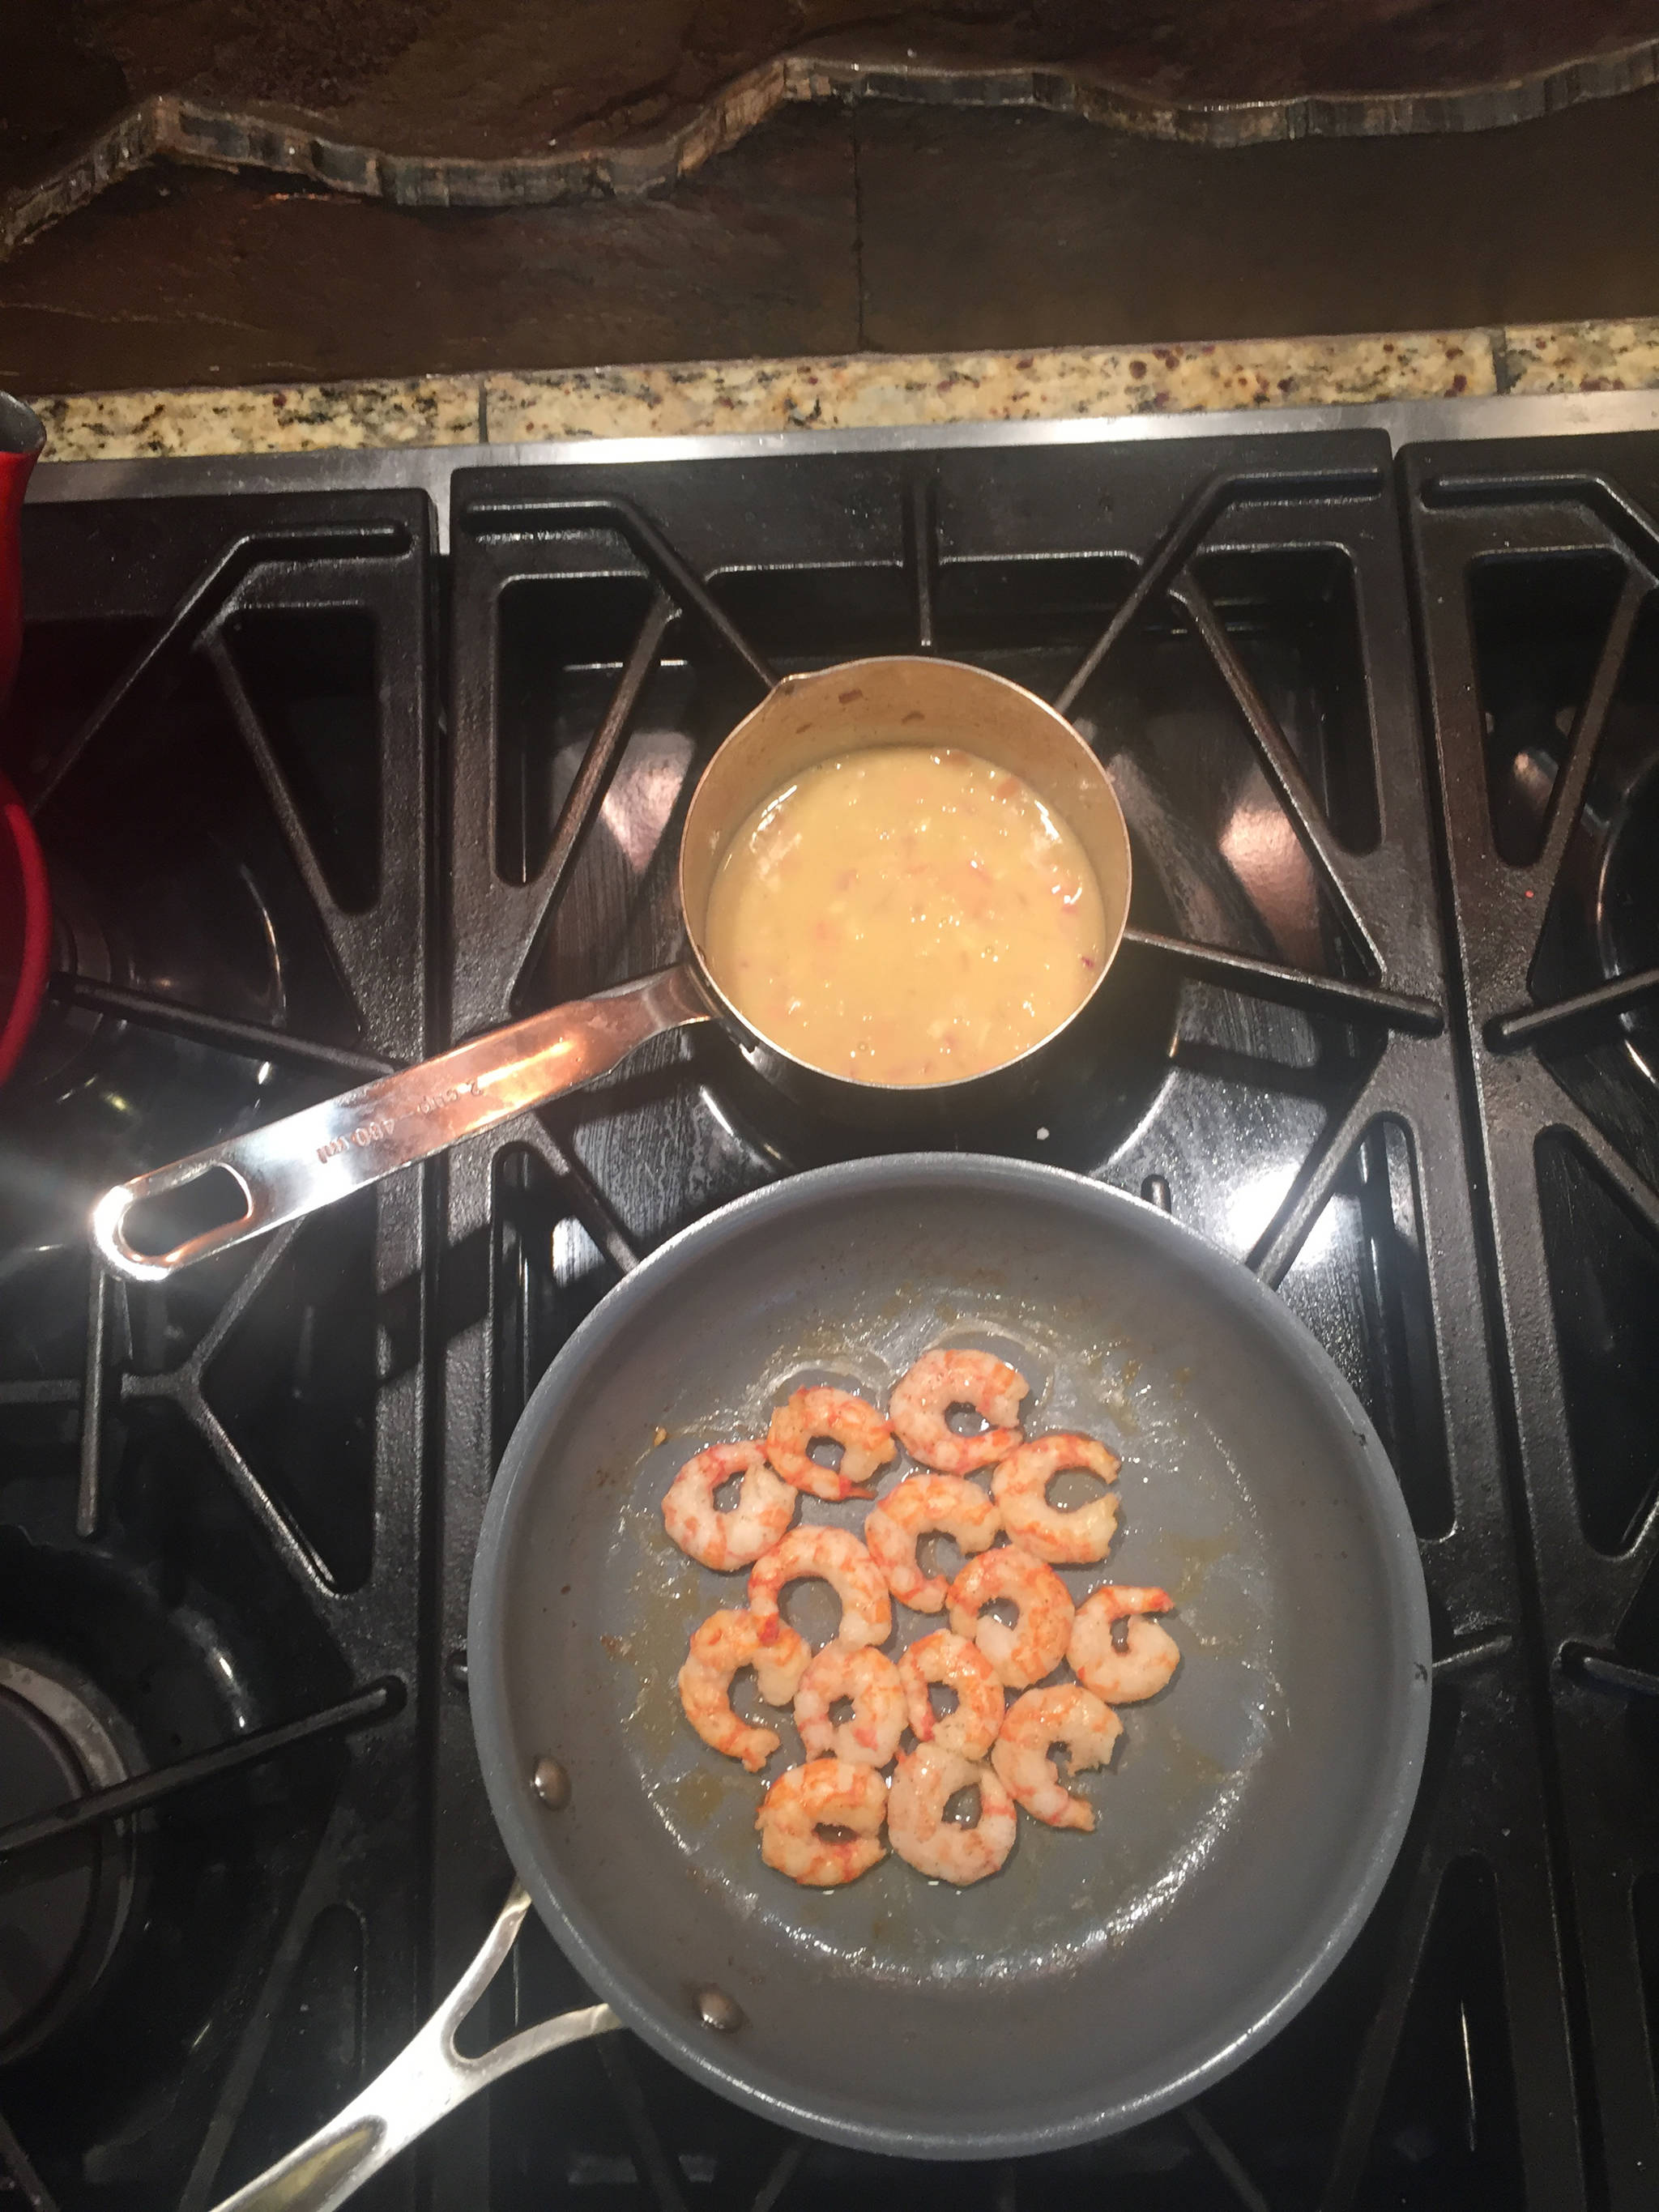 Prince William Sound Spot Shrimp with Champagne Ginger Butter Sauce is the perfect recipe to start off the traditional start of summer, as seen here in Teri Robl’s kitchen on May 28, 2019, in Homer, Alaska. (Photo by Teri Robl)